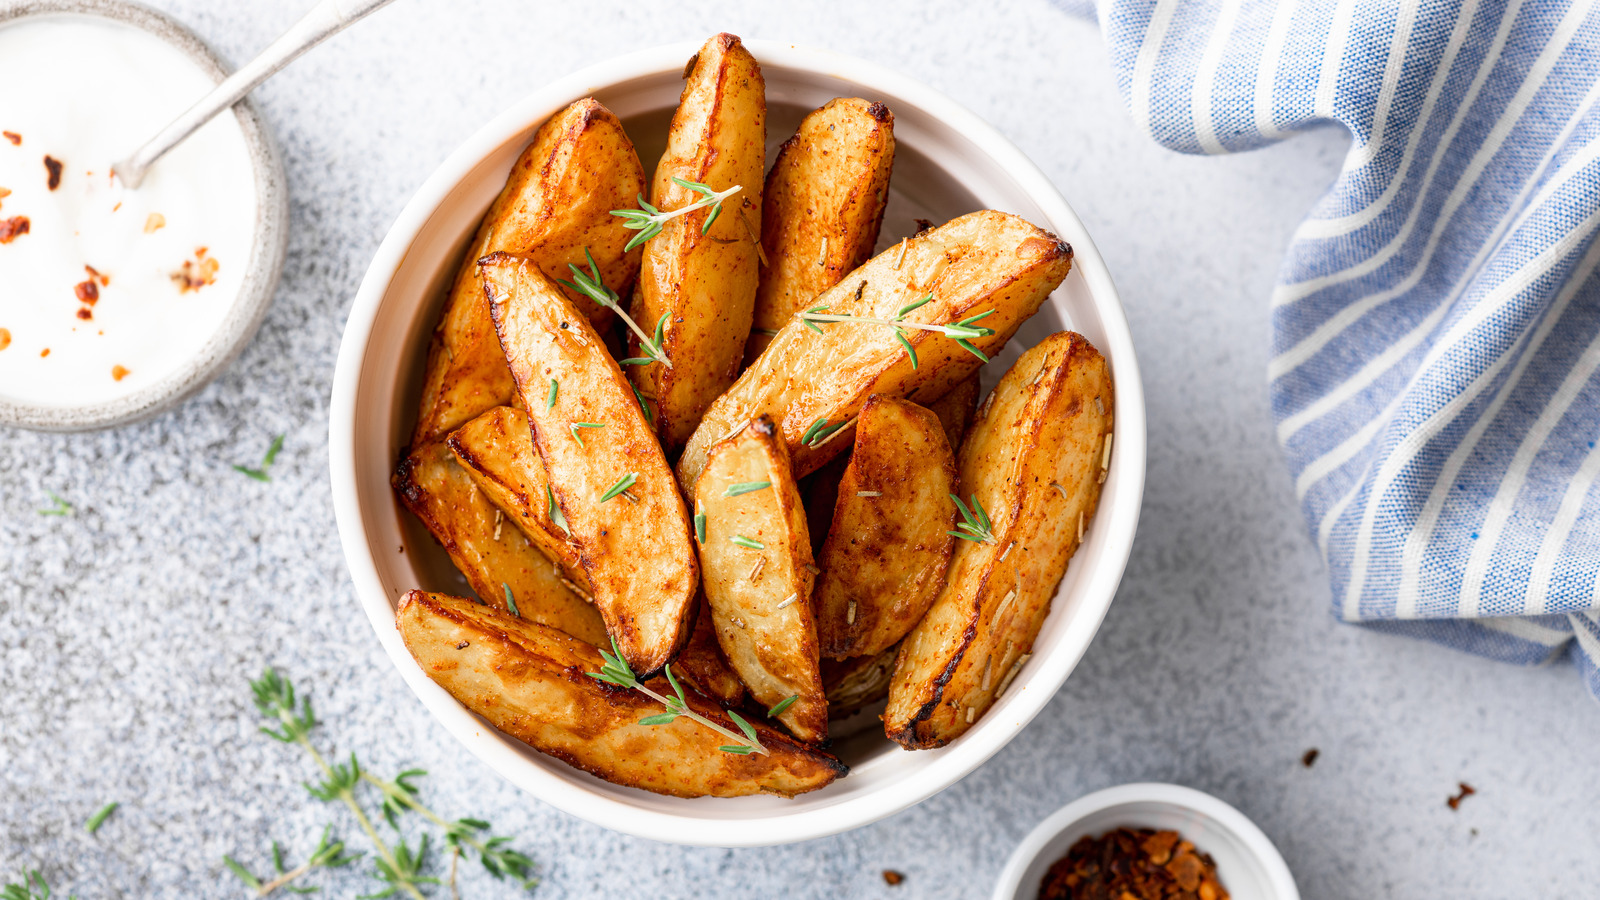 The Best Way To Reheat Roasted Potatoes And Maintain Crispiness